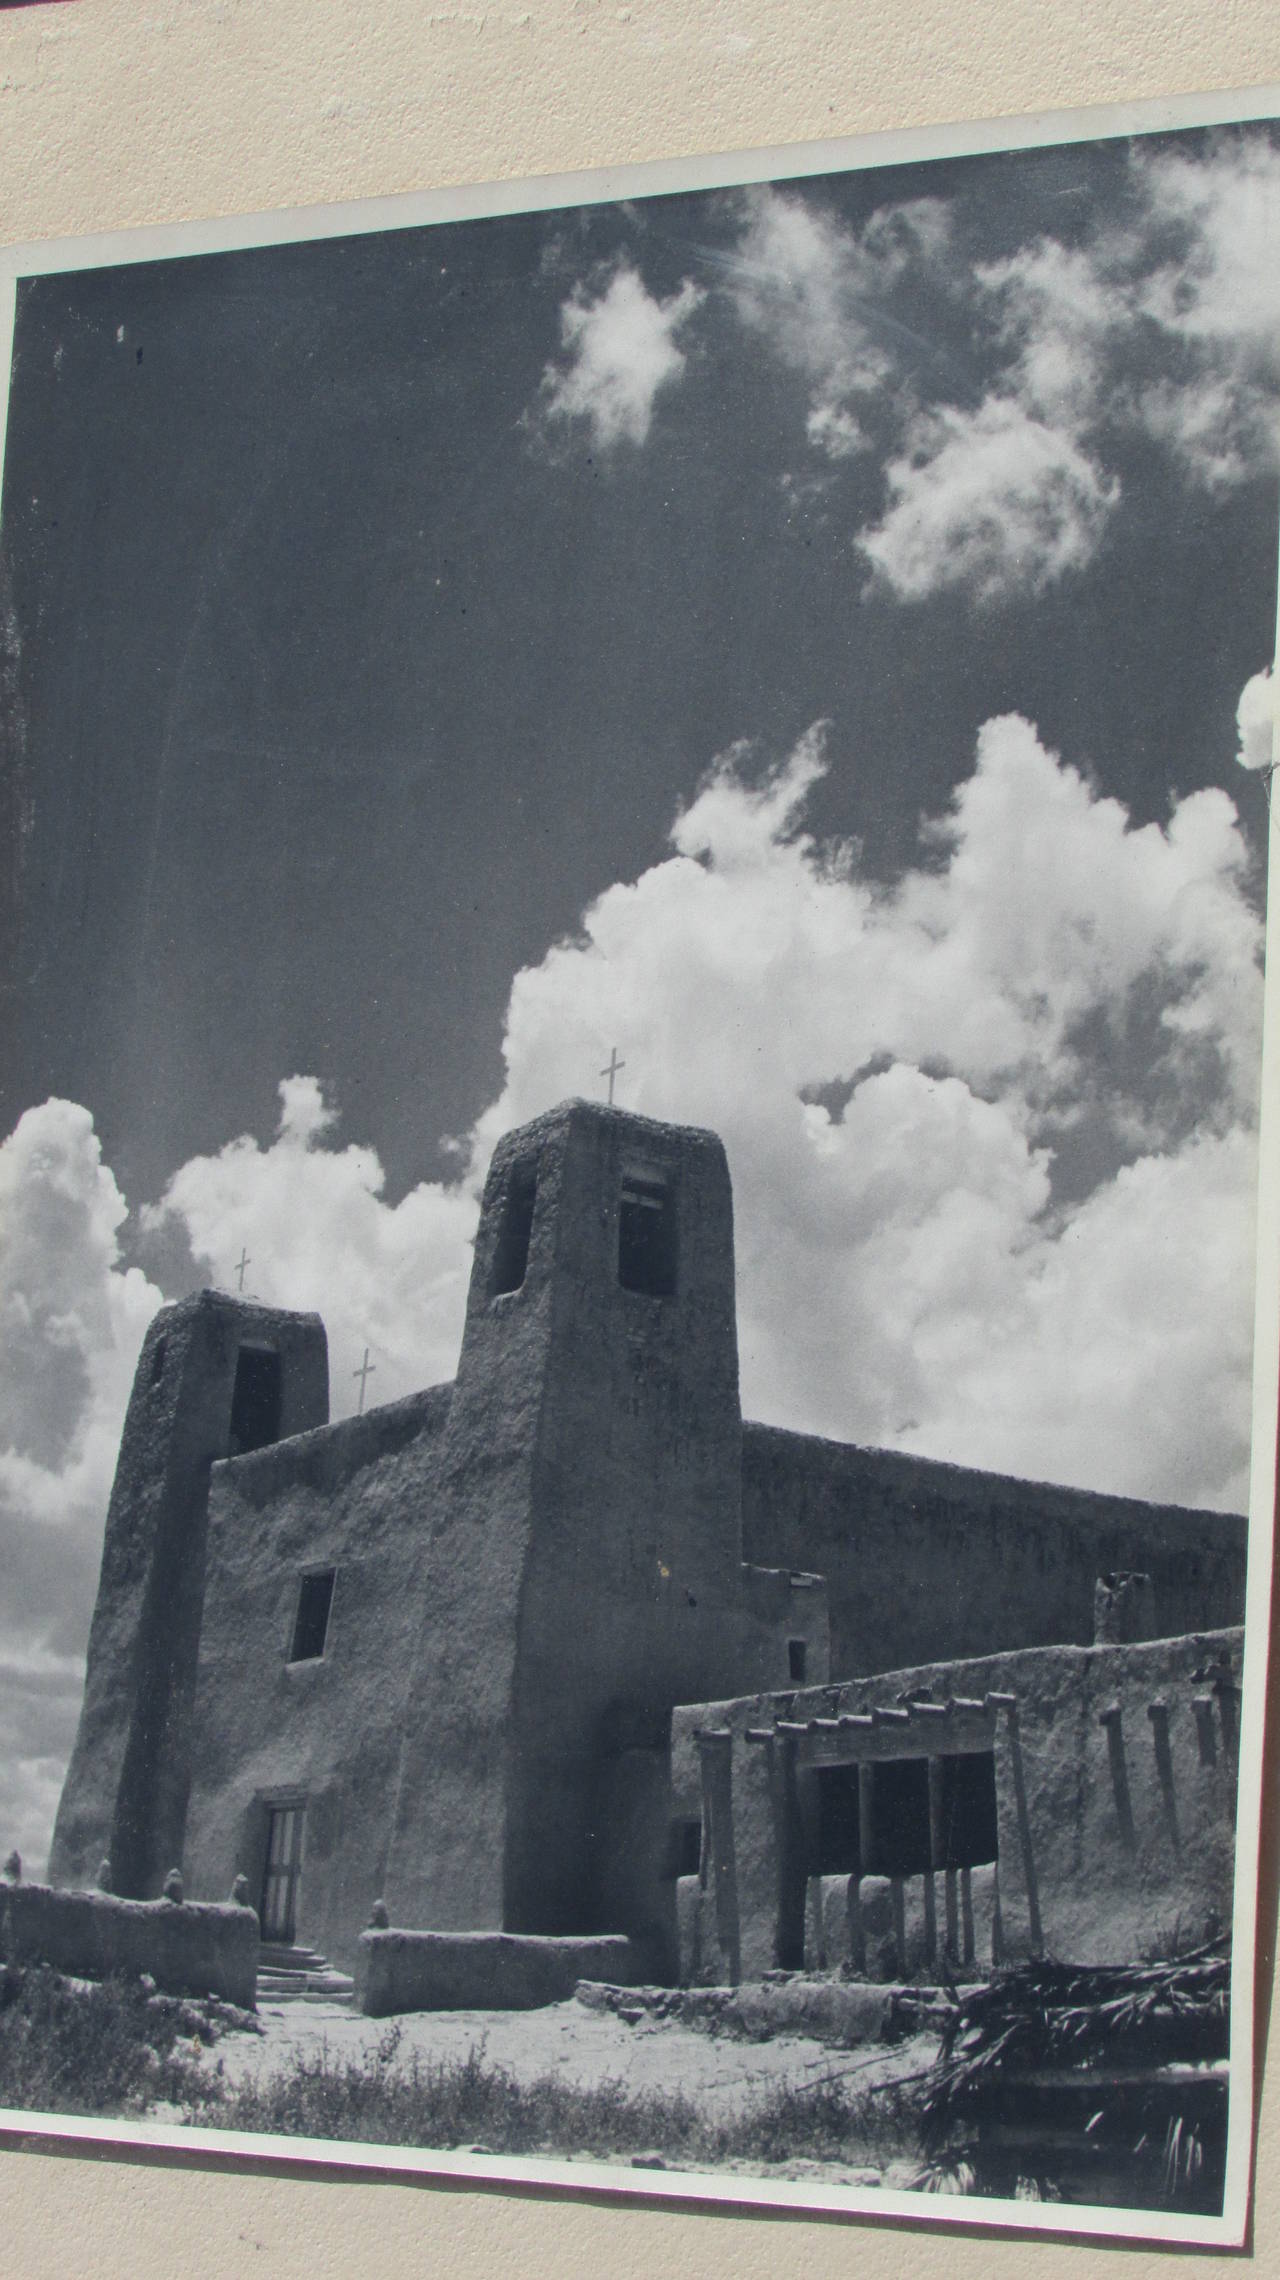 American Vintage New Mexico Stark Landscape Photograph with Mission Church